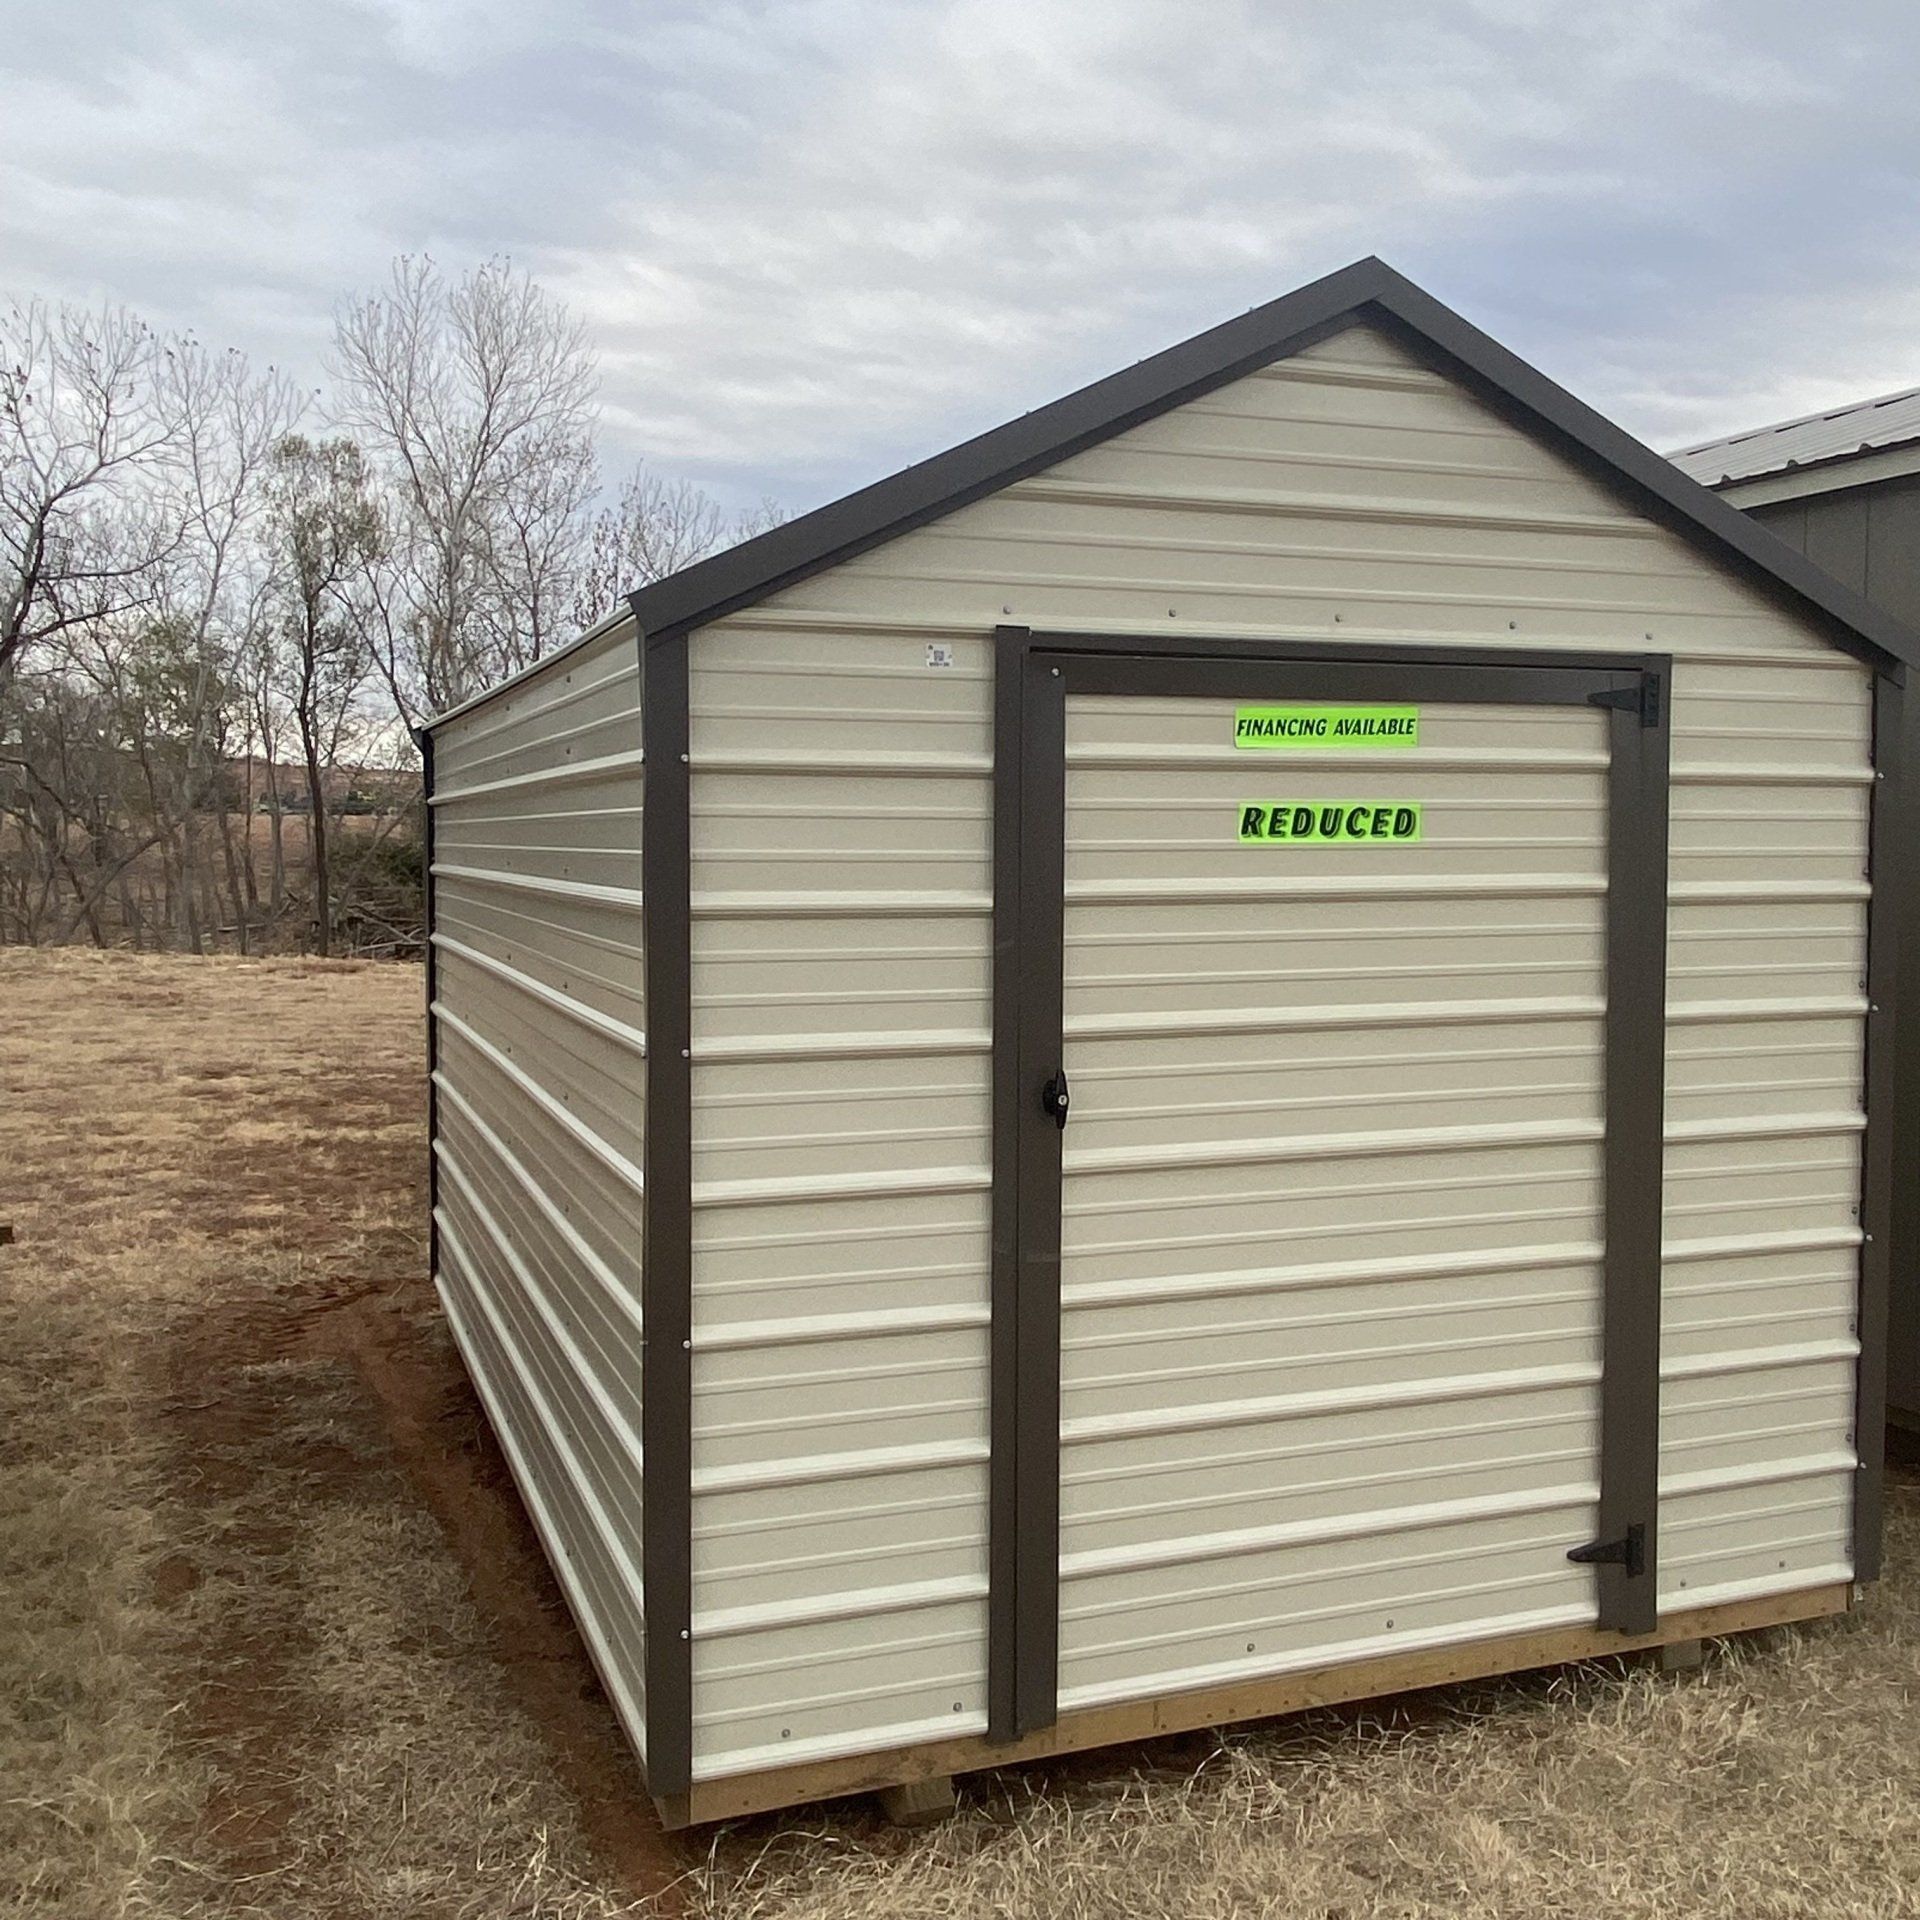 A metal shed with a green sign on the door that says approved